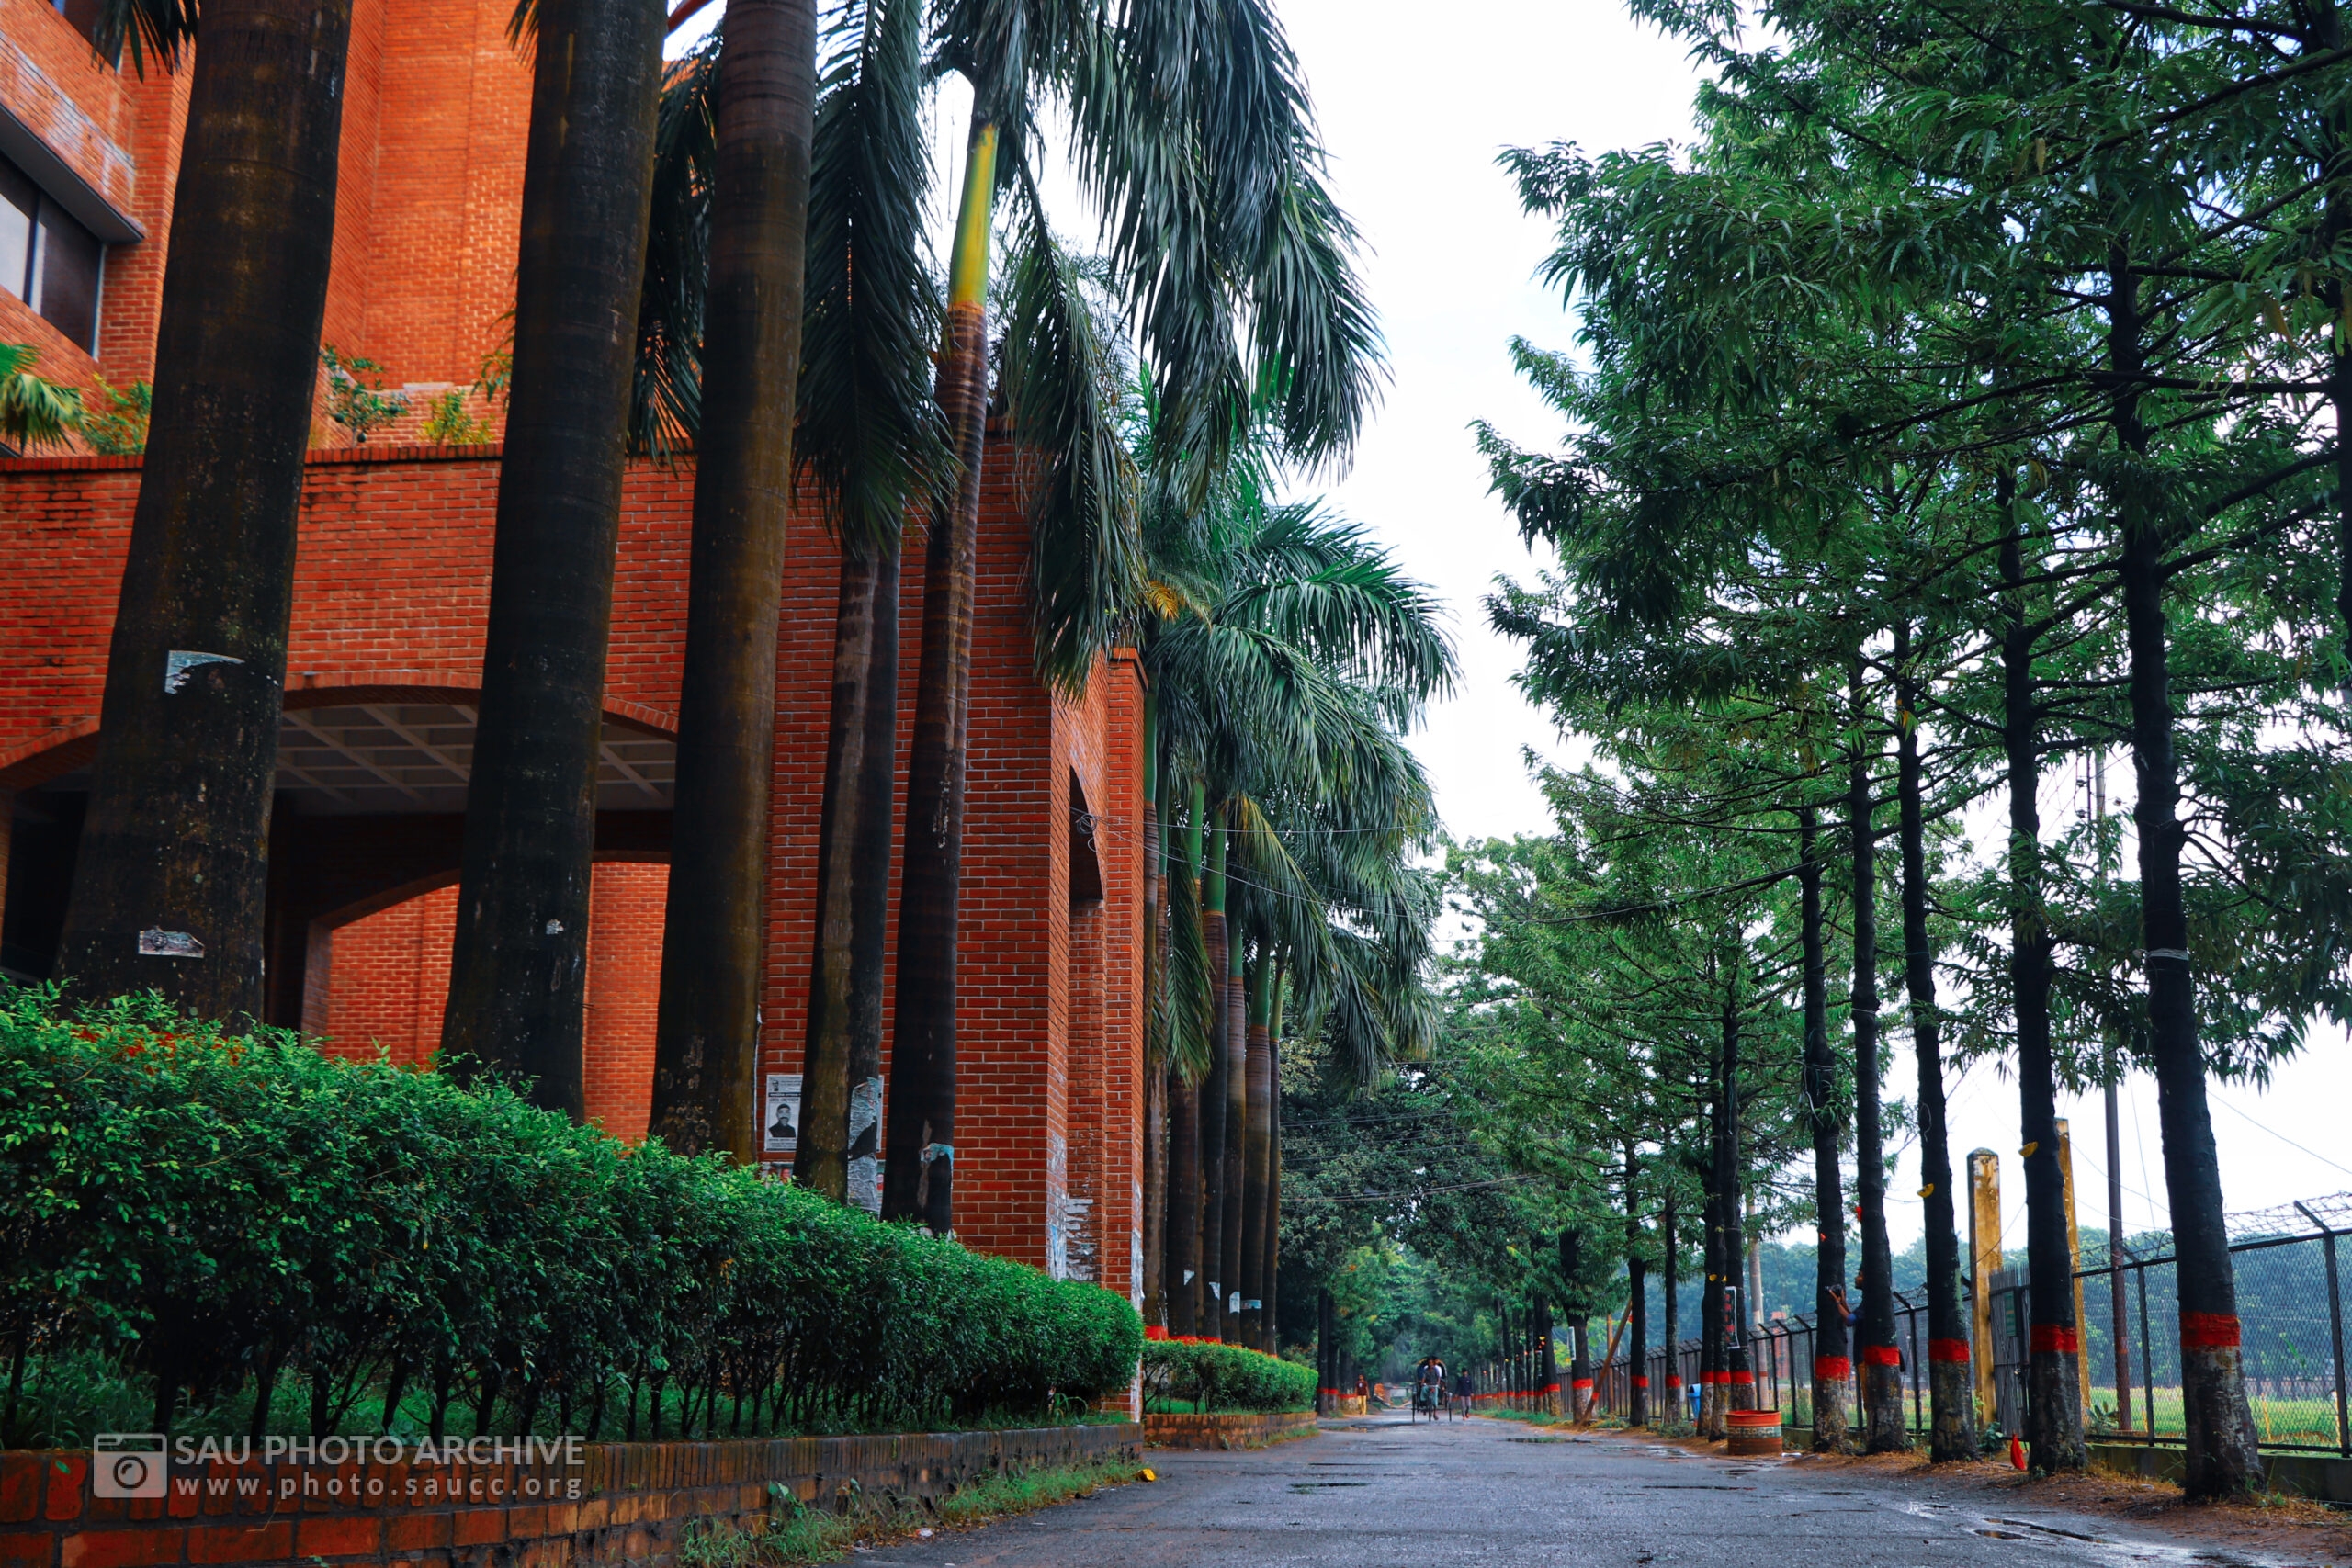 A Road photo is captured by Md. Nazmus Sakib Anik at Sher-e-Bangla Agricultural University titled Road in front of Administrative Building